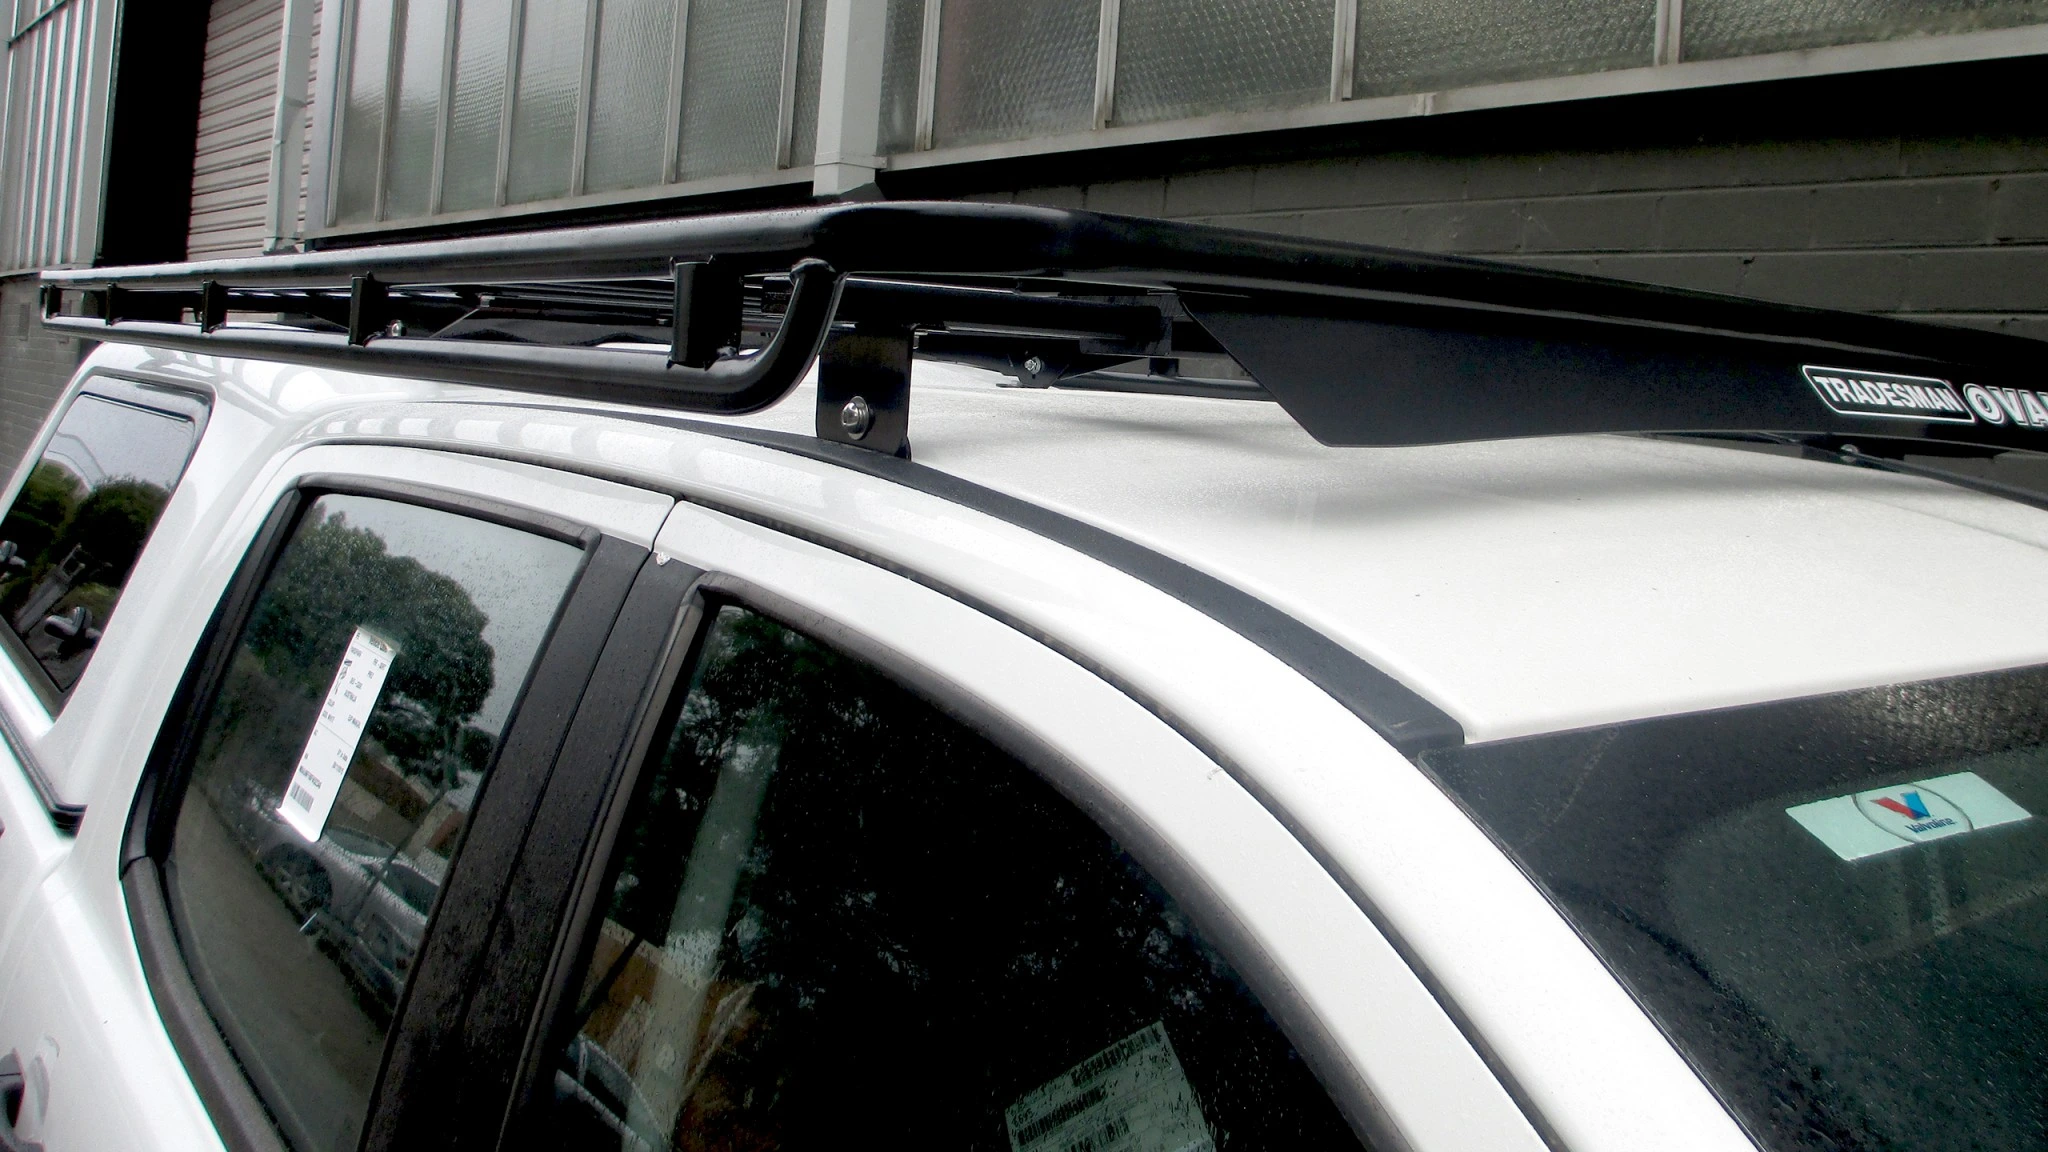 Flat-deck-full-length-Oval-Steel-roof-rack-with-up-side-down-rails-on-a-Ford-Ranger-and-ARB-canopy